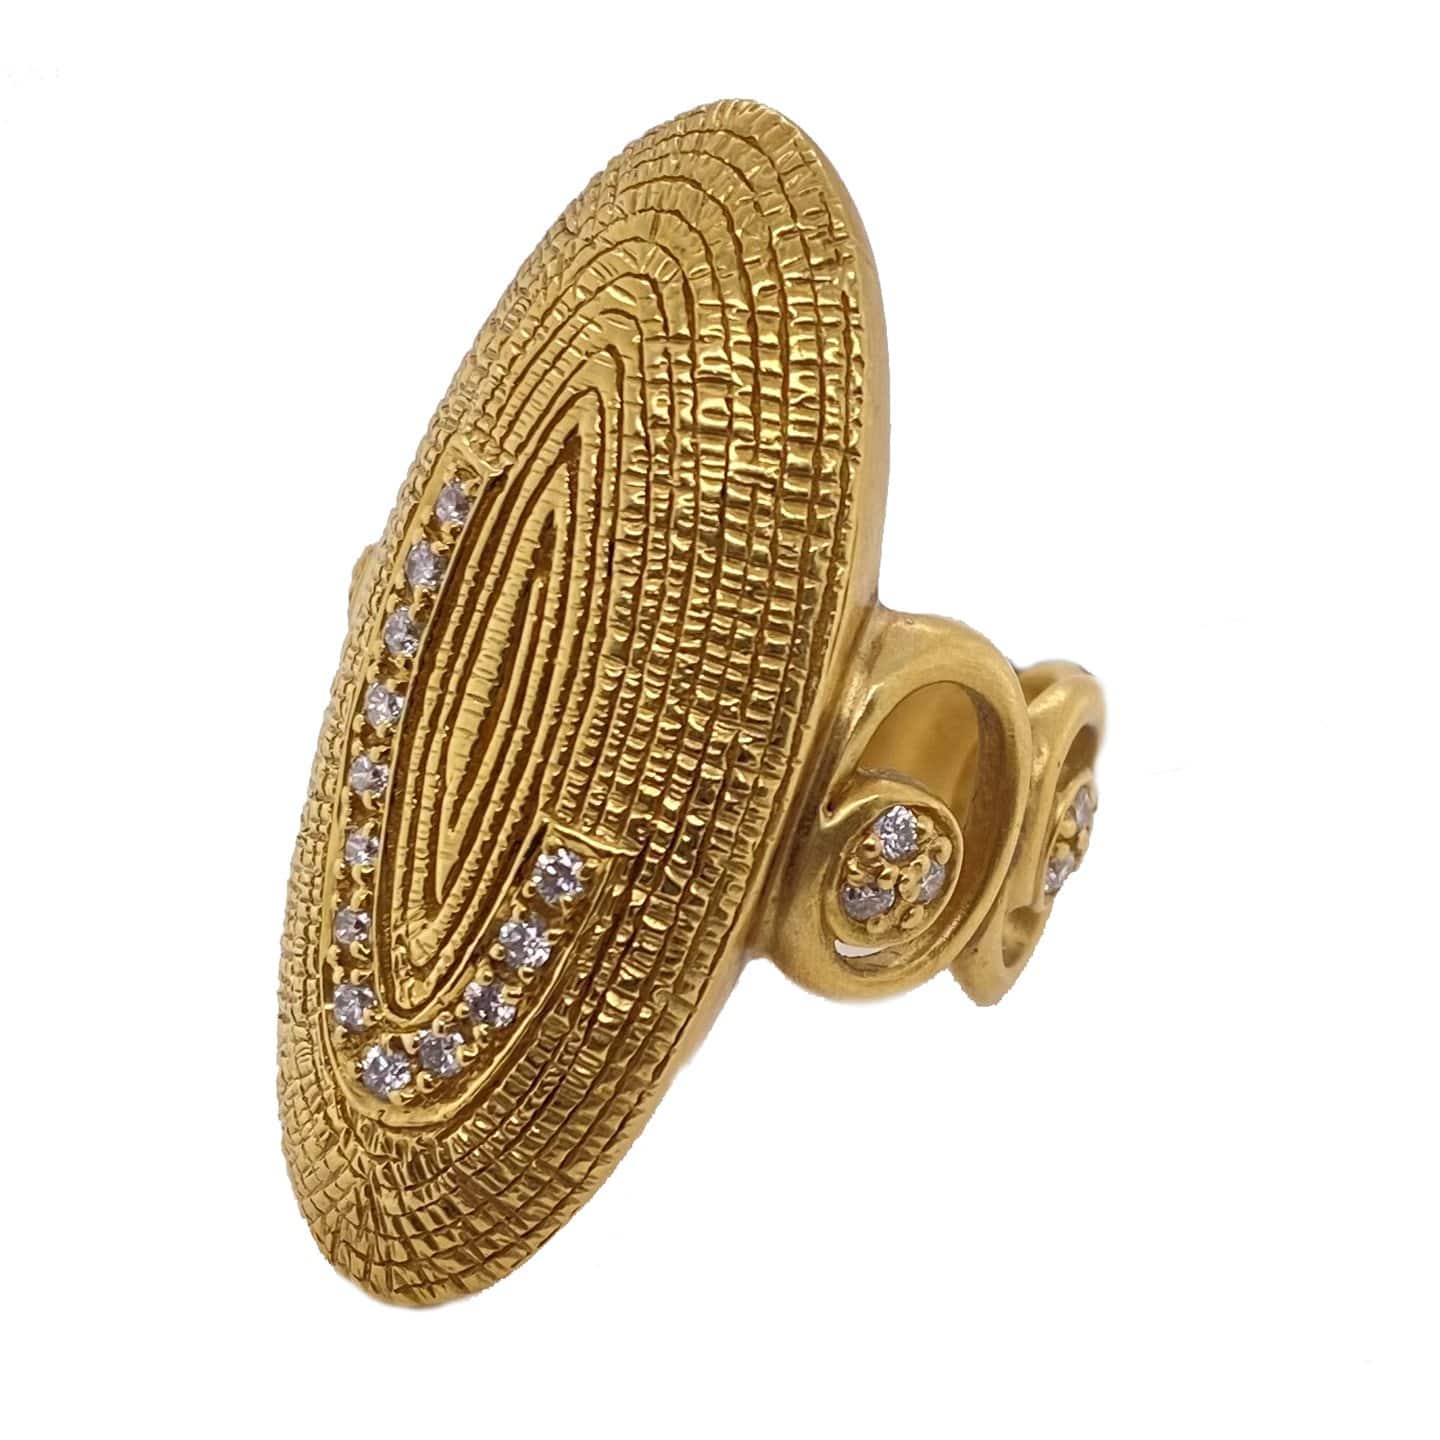 Eternity Oval Ring with Rose-Cut Diamonds in 20K Yellow Gold - Coomi